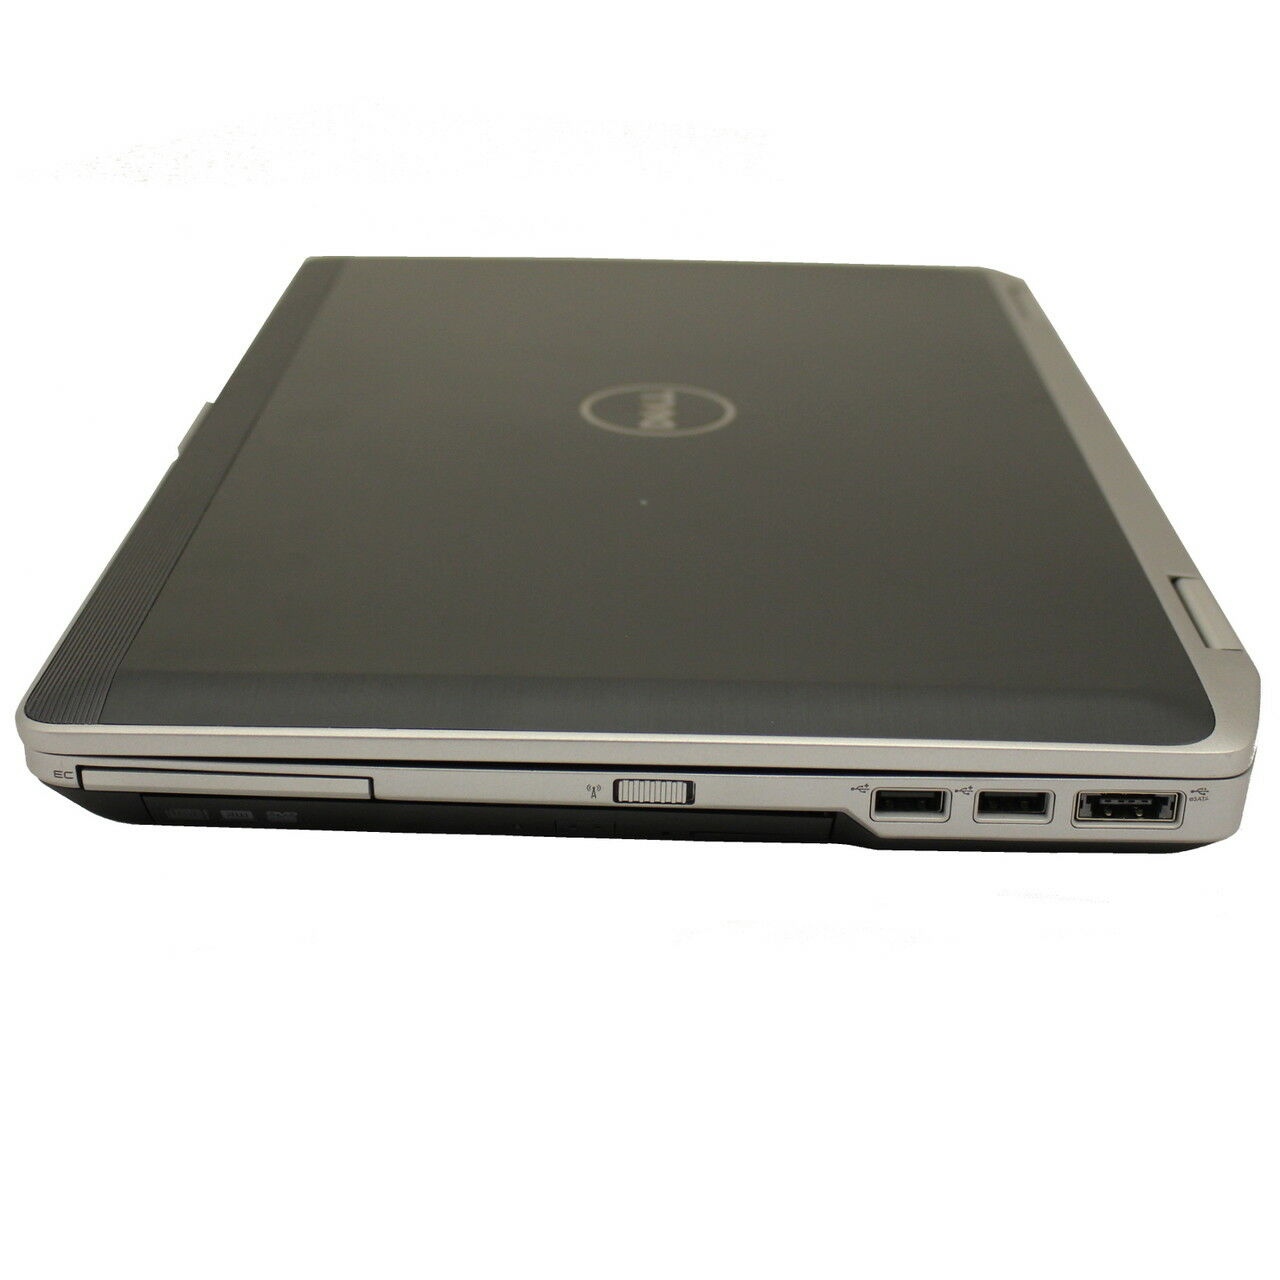 london used laptop Dell Latitude E6420 14" Laptop intel Core i5 for sale at cheap wholesale price in ikeja lagos nigeria . uk used laptop, london used laptop , Original laptop , computer shop in lagos , laptop for sale in lagos , computer stores in lagos nigeria , wholesale computer shop in lagos nigeria , laptop supply shops/store in lagos , Hp laptop for sale , dell laptops for sale , buy laptops online, lenovo laptop for sale , shopeinverse store in lagos , shopinverse computer , shopinverse laptops , note books computers , second hand laptop, cheap laptop for sale in lagos , laptop repair shop in lagos, gbn mobile computers , gbn mobile laptops /computers store, computer village lagos ikeja shops , laptops for sale in computer village